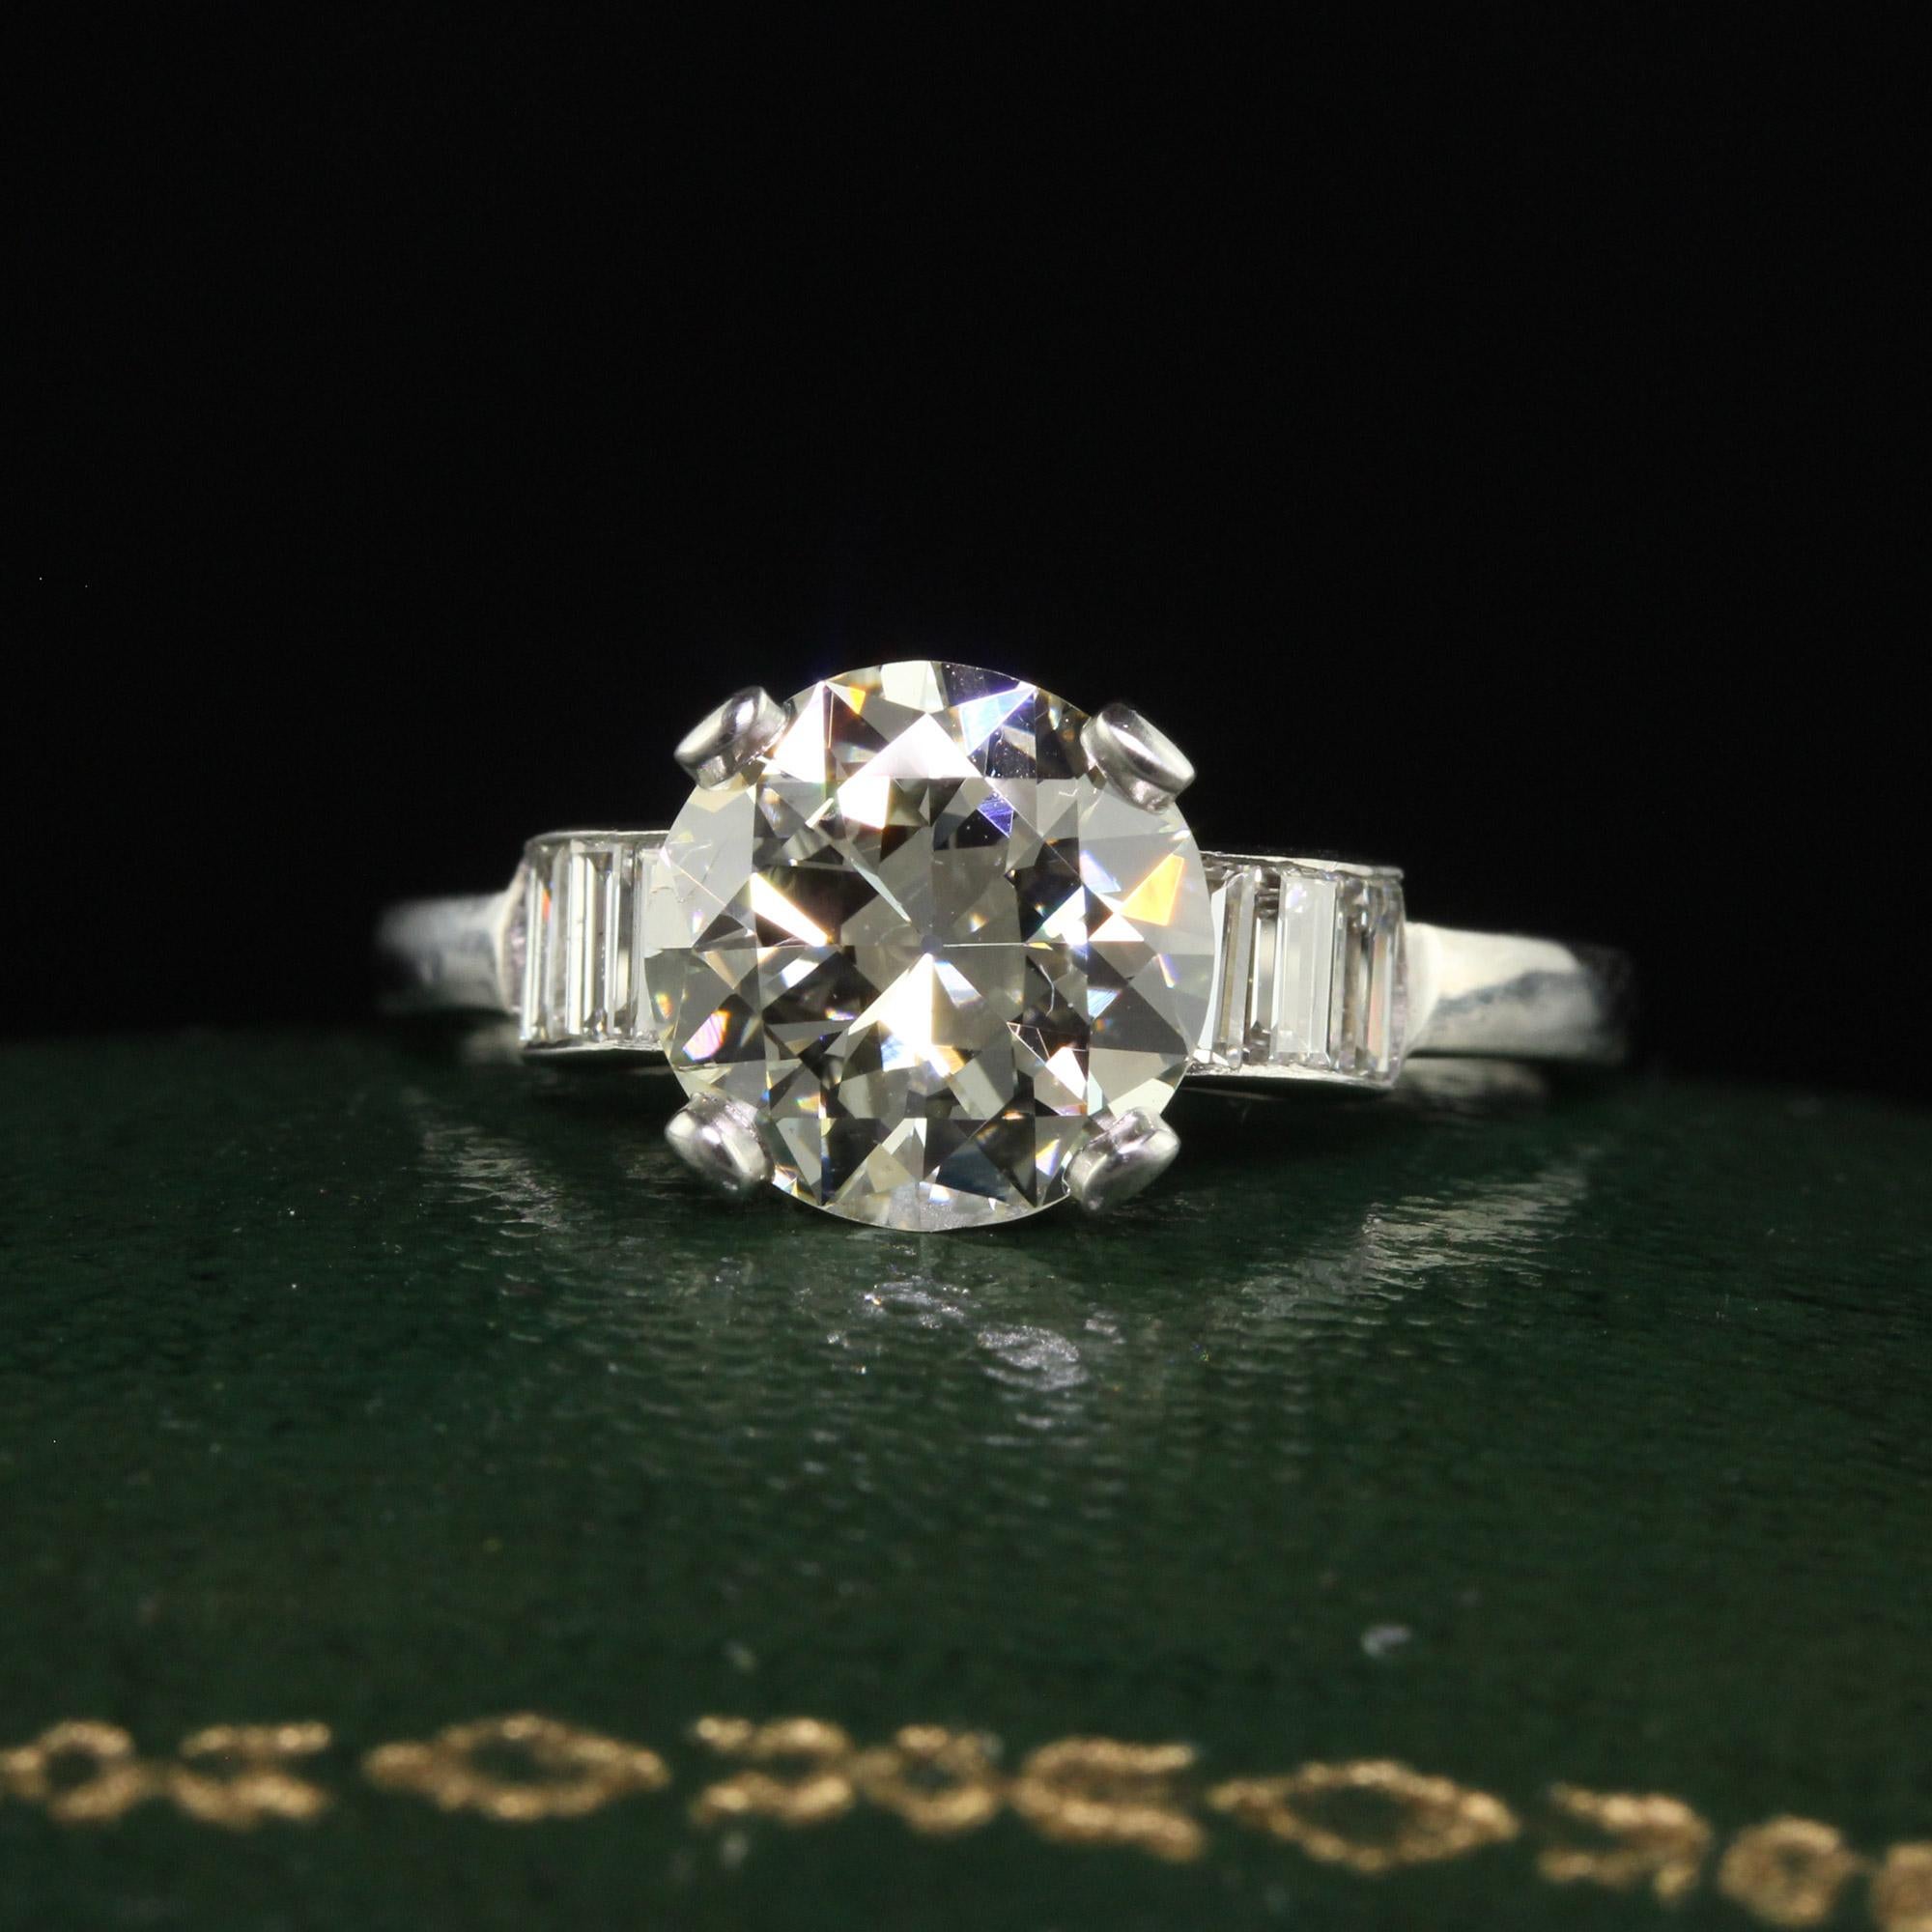 Beautiful Vintage Retro Platinum Old European Diamond Engagement Ring - GIA. This classic Retro diamond engagement ring is crafted in platinum. The center holds a beautiful old European transitional cut diamond with a GIA report and is set in a